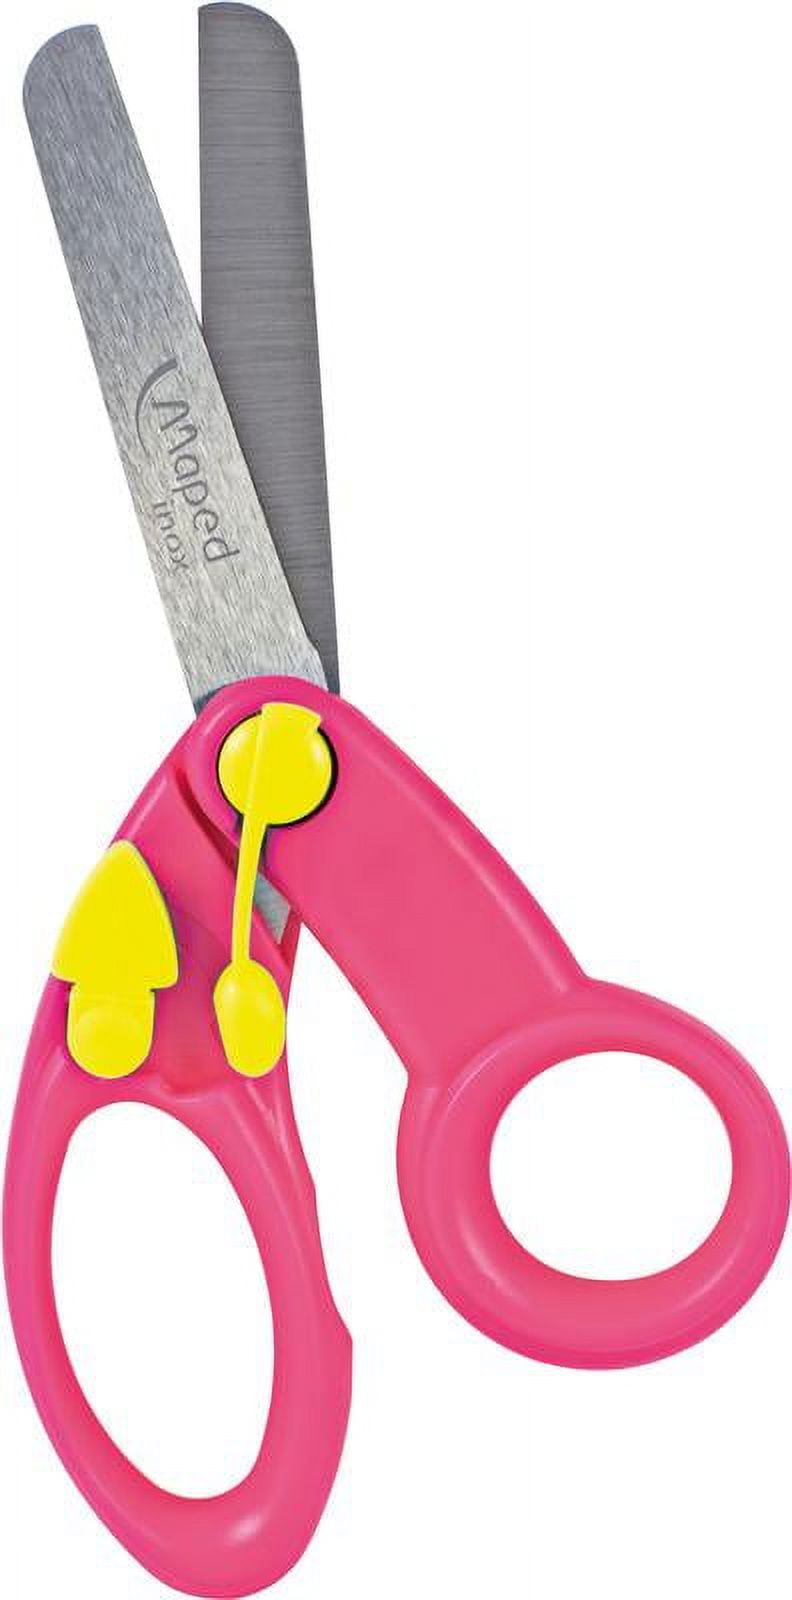 Maped® Kidicut 4.75 Spring-assisted Plastic Safety Scissors, Pack